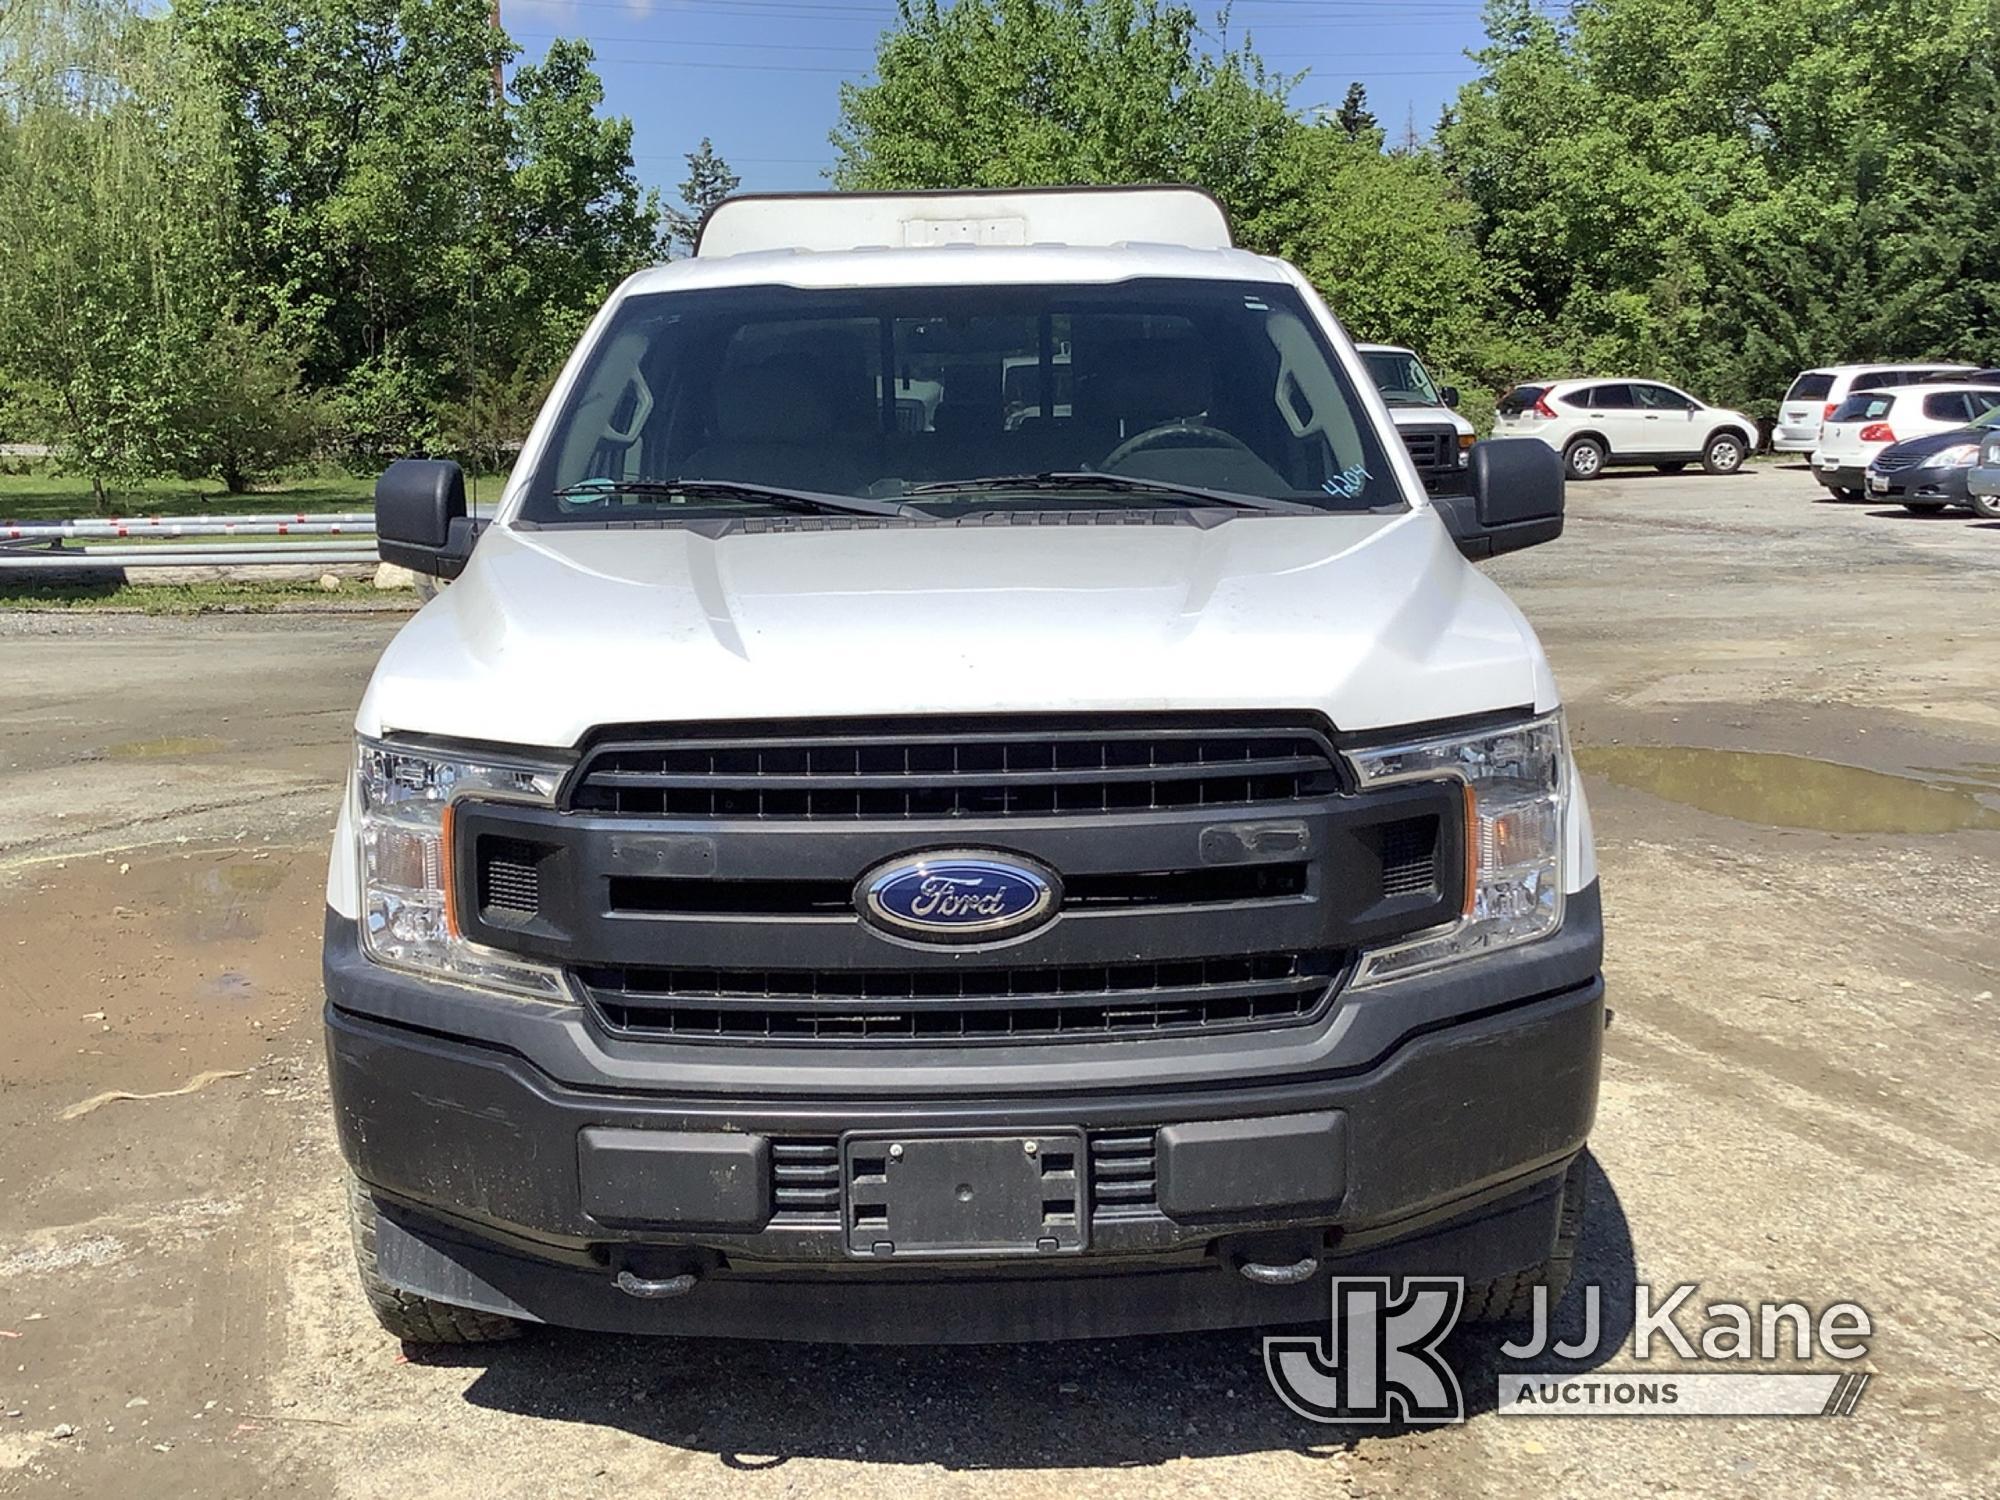 (Harmans, MD) 2018 Ford F150 4x4 Extended-Cab Pickup Truck Runs & Moves, Transmission Issues, Rust &